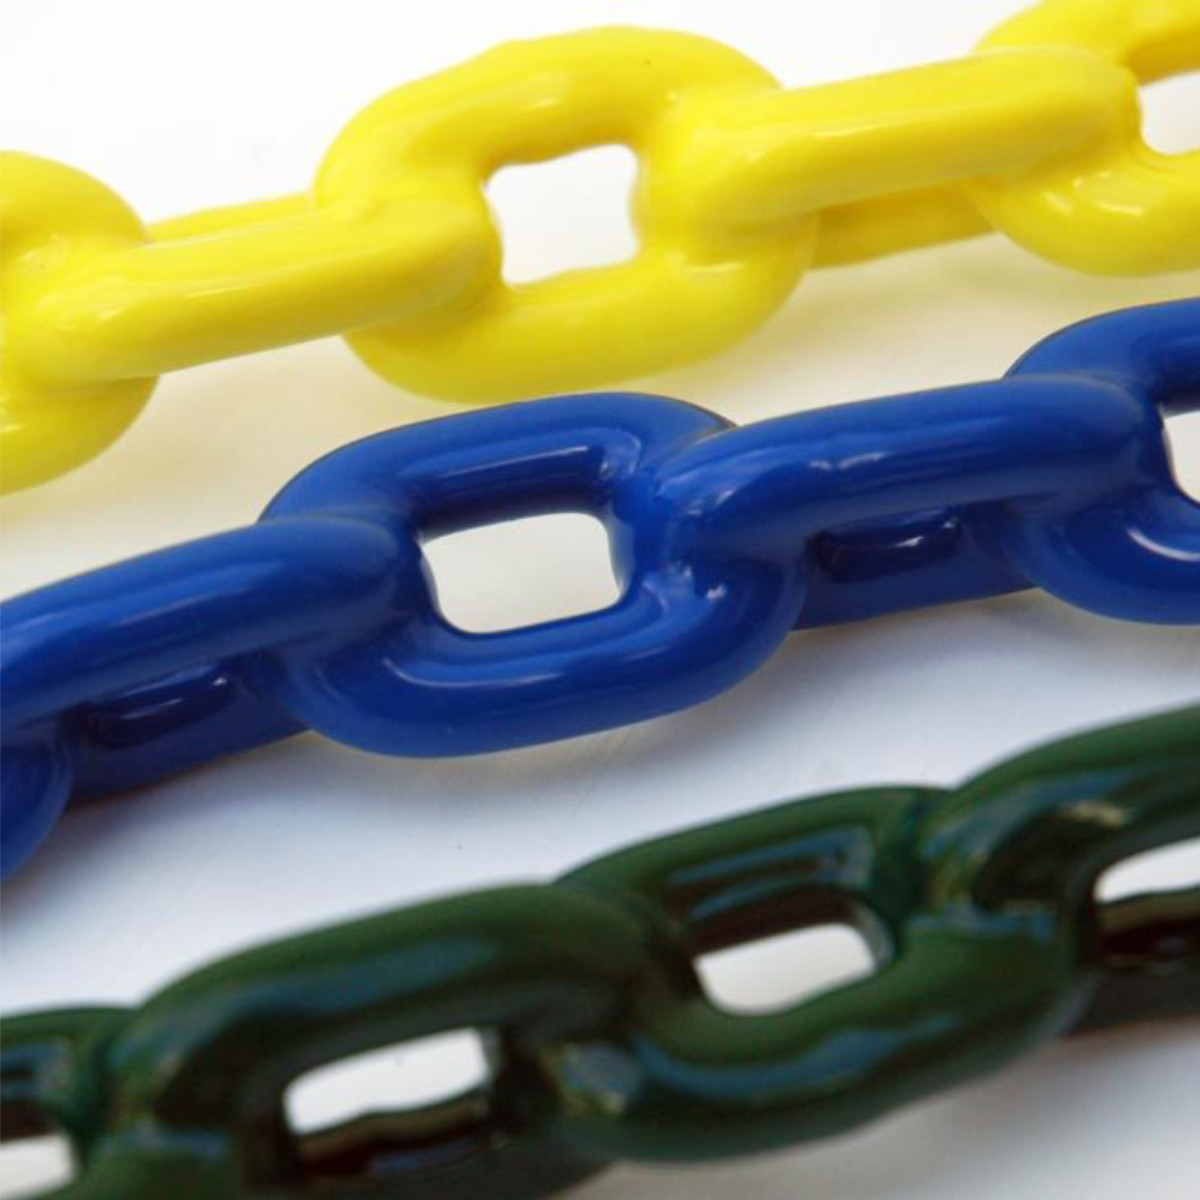 Fully Plastisol Coated Chain - Blue, Green, and Yellow